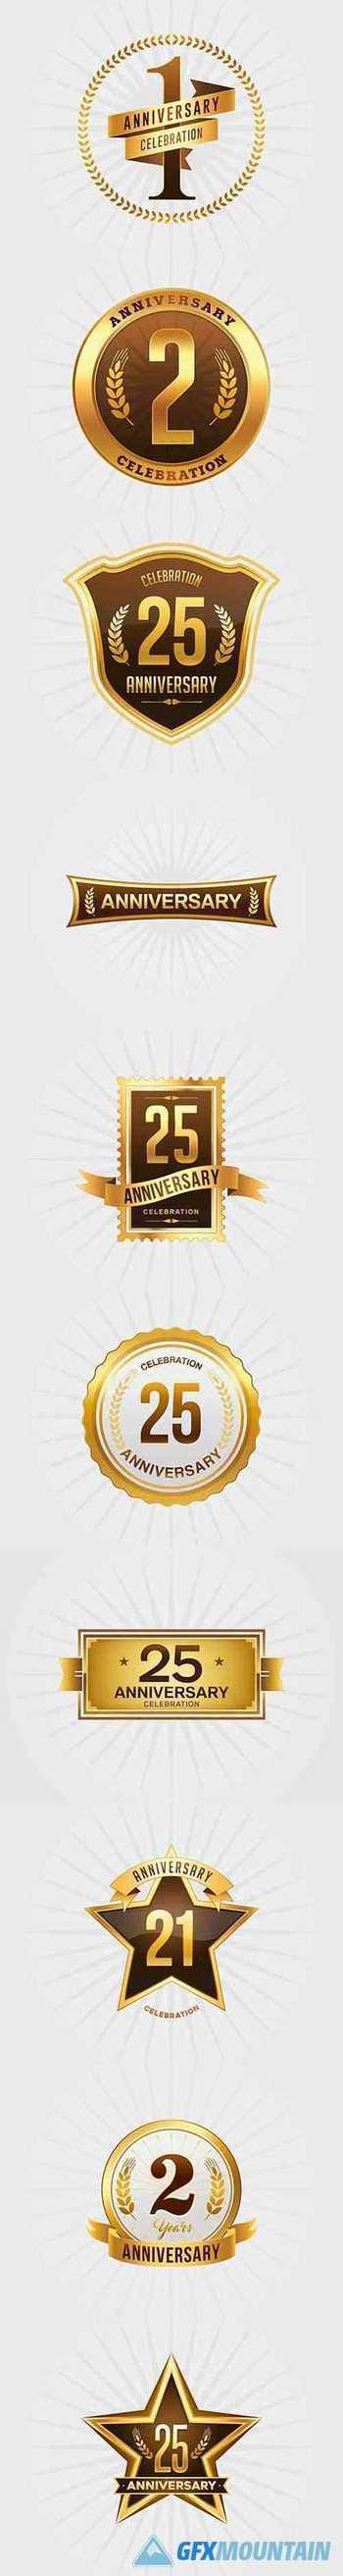 Anniversery Gold Badges